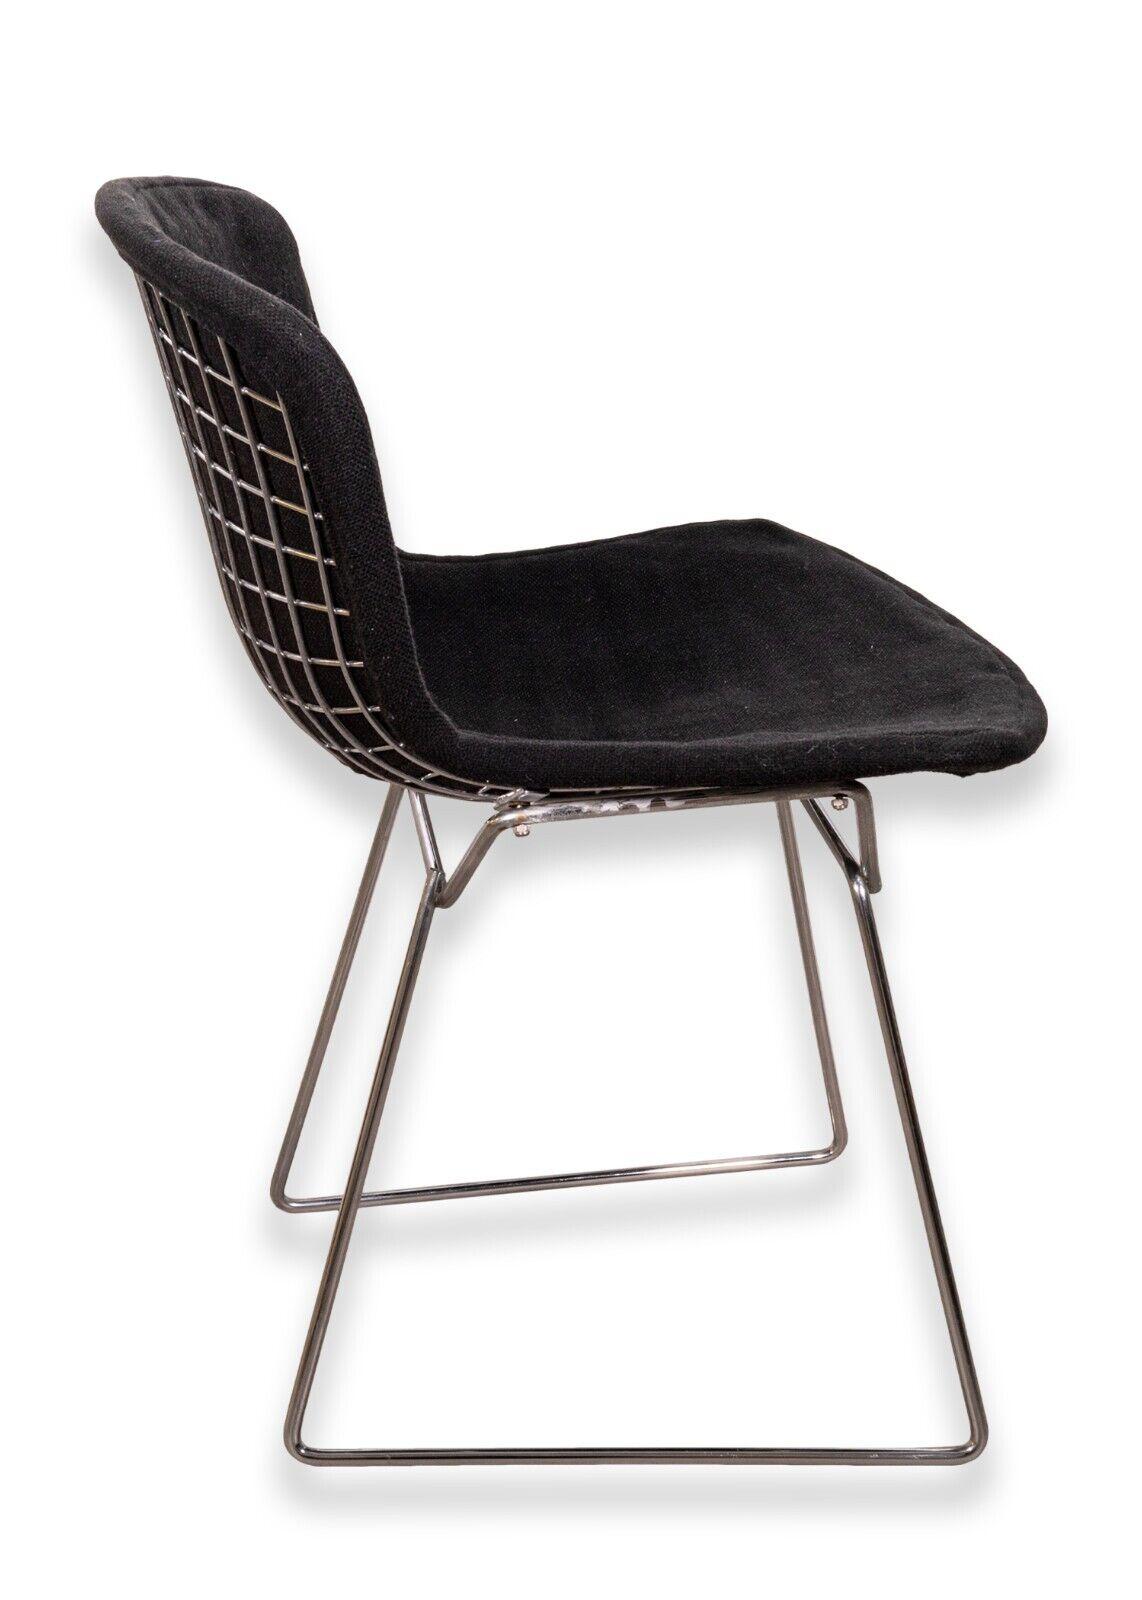 Mid-Century Modern Vintage Mid Century Set of 4 Knoll Bertoia Wire Side Chairs Black Seat Covers